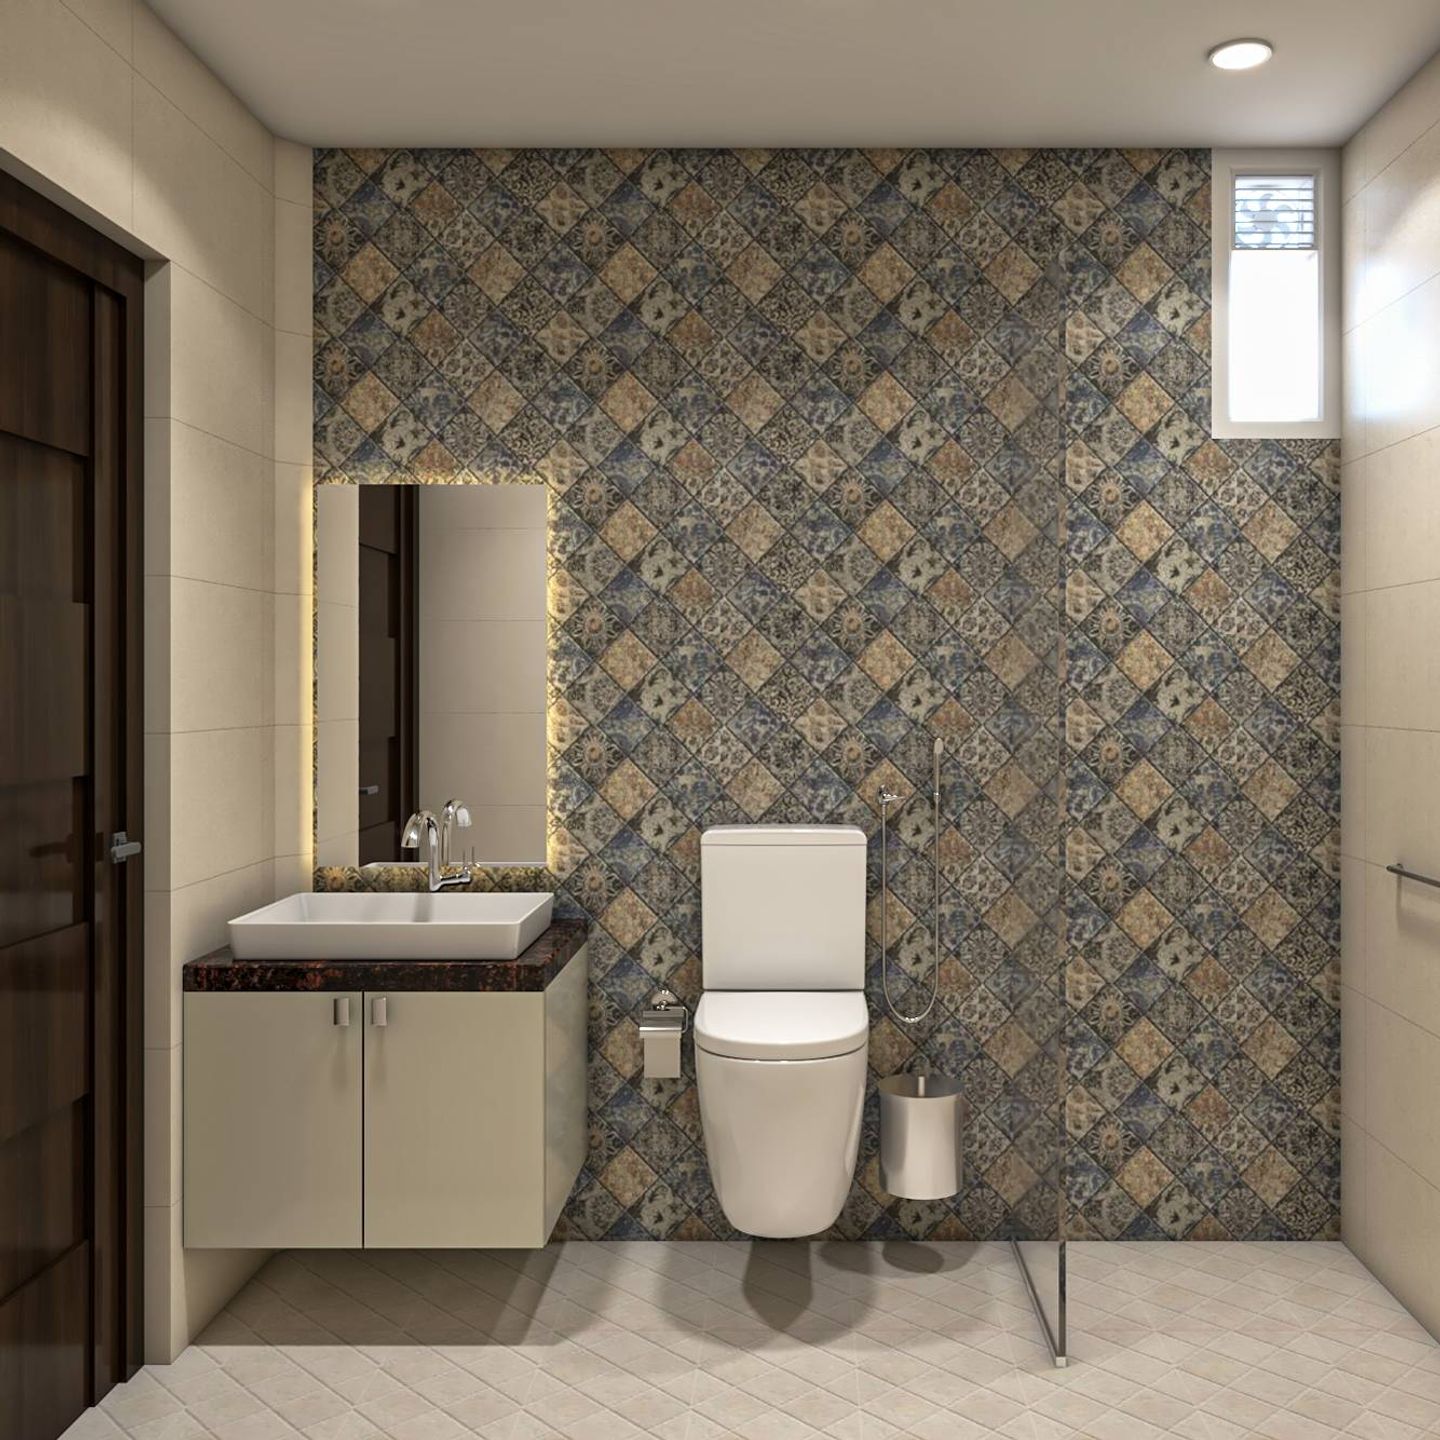 Bathroom With Patterned Accent Wall - Livspace